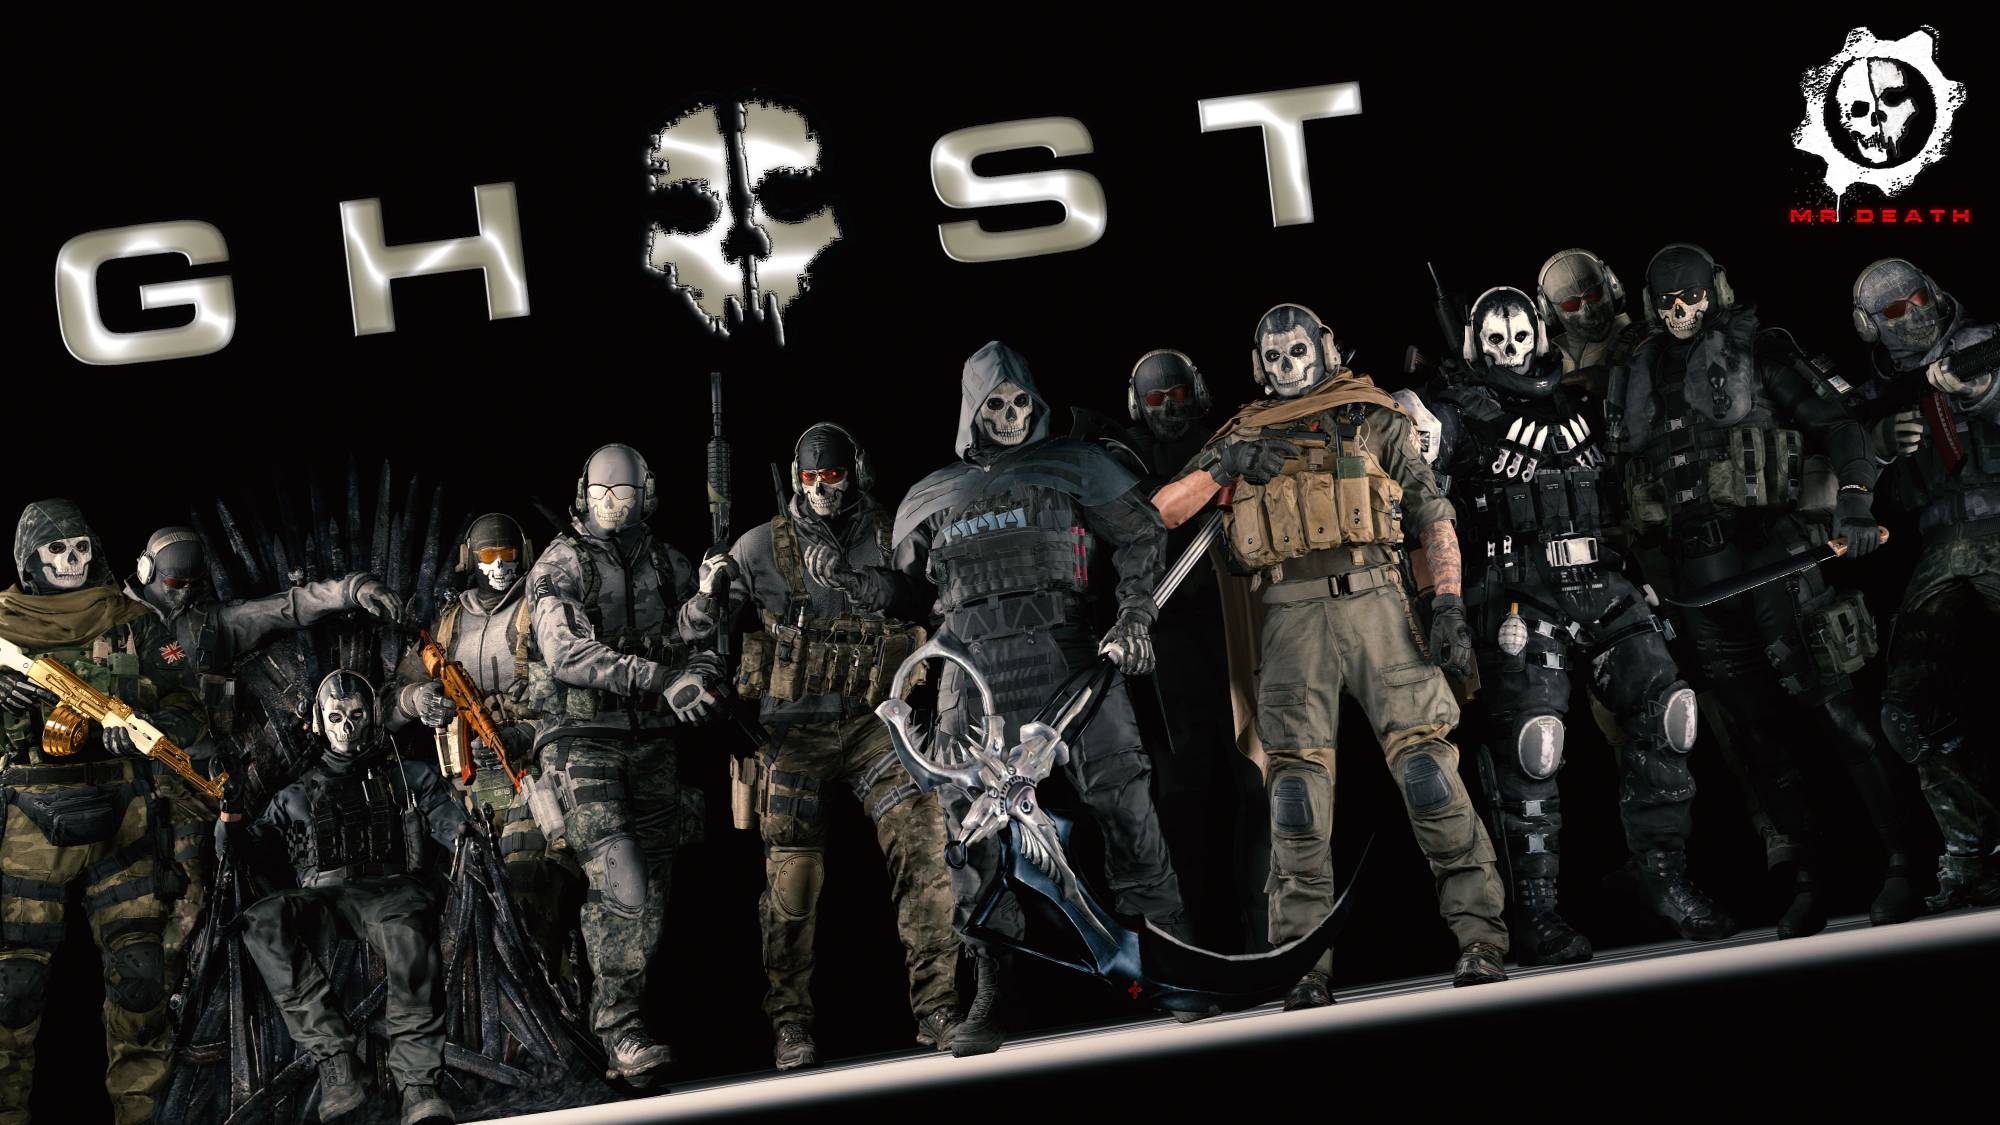 Call Of Duty Ghost Wallpaper HD by TigerTarget on DeviantArt